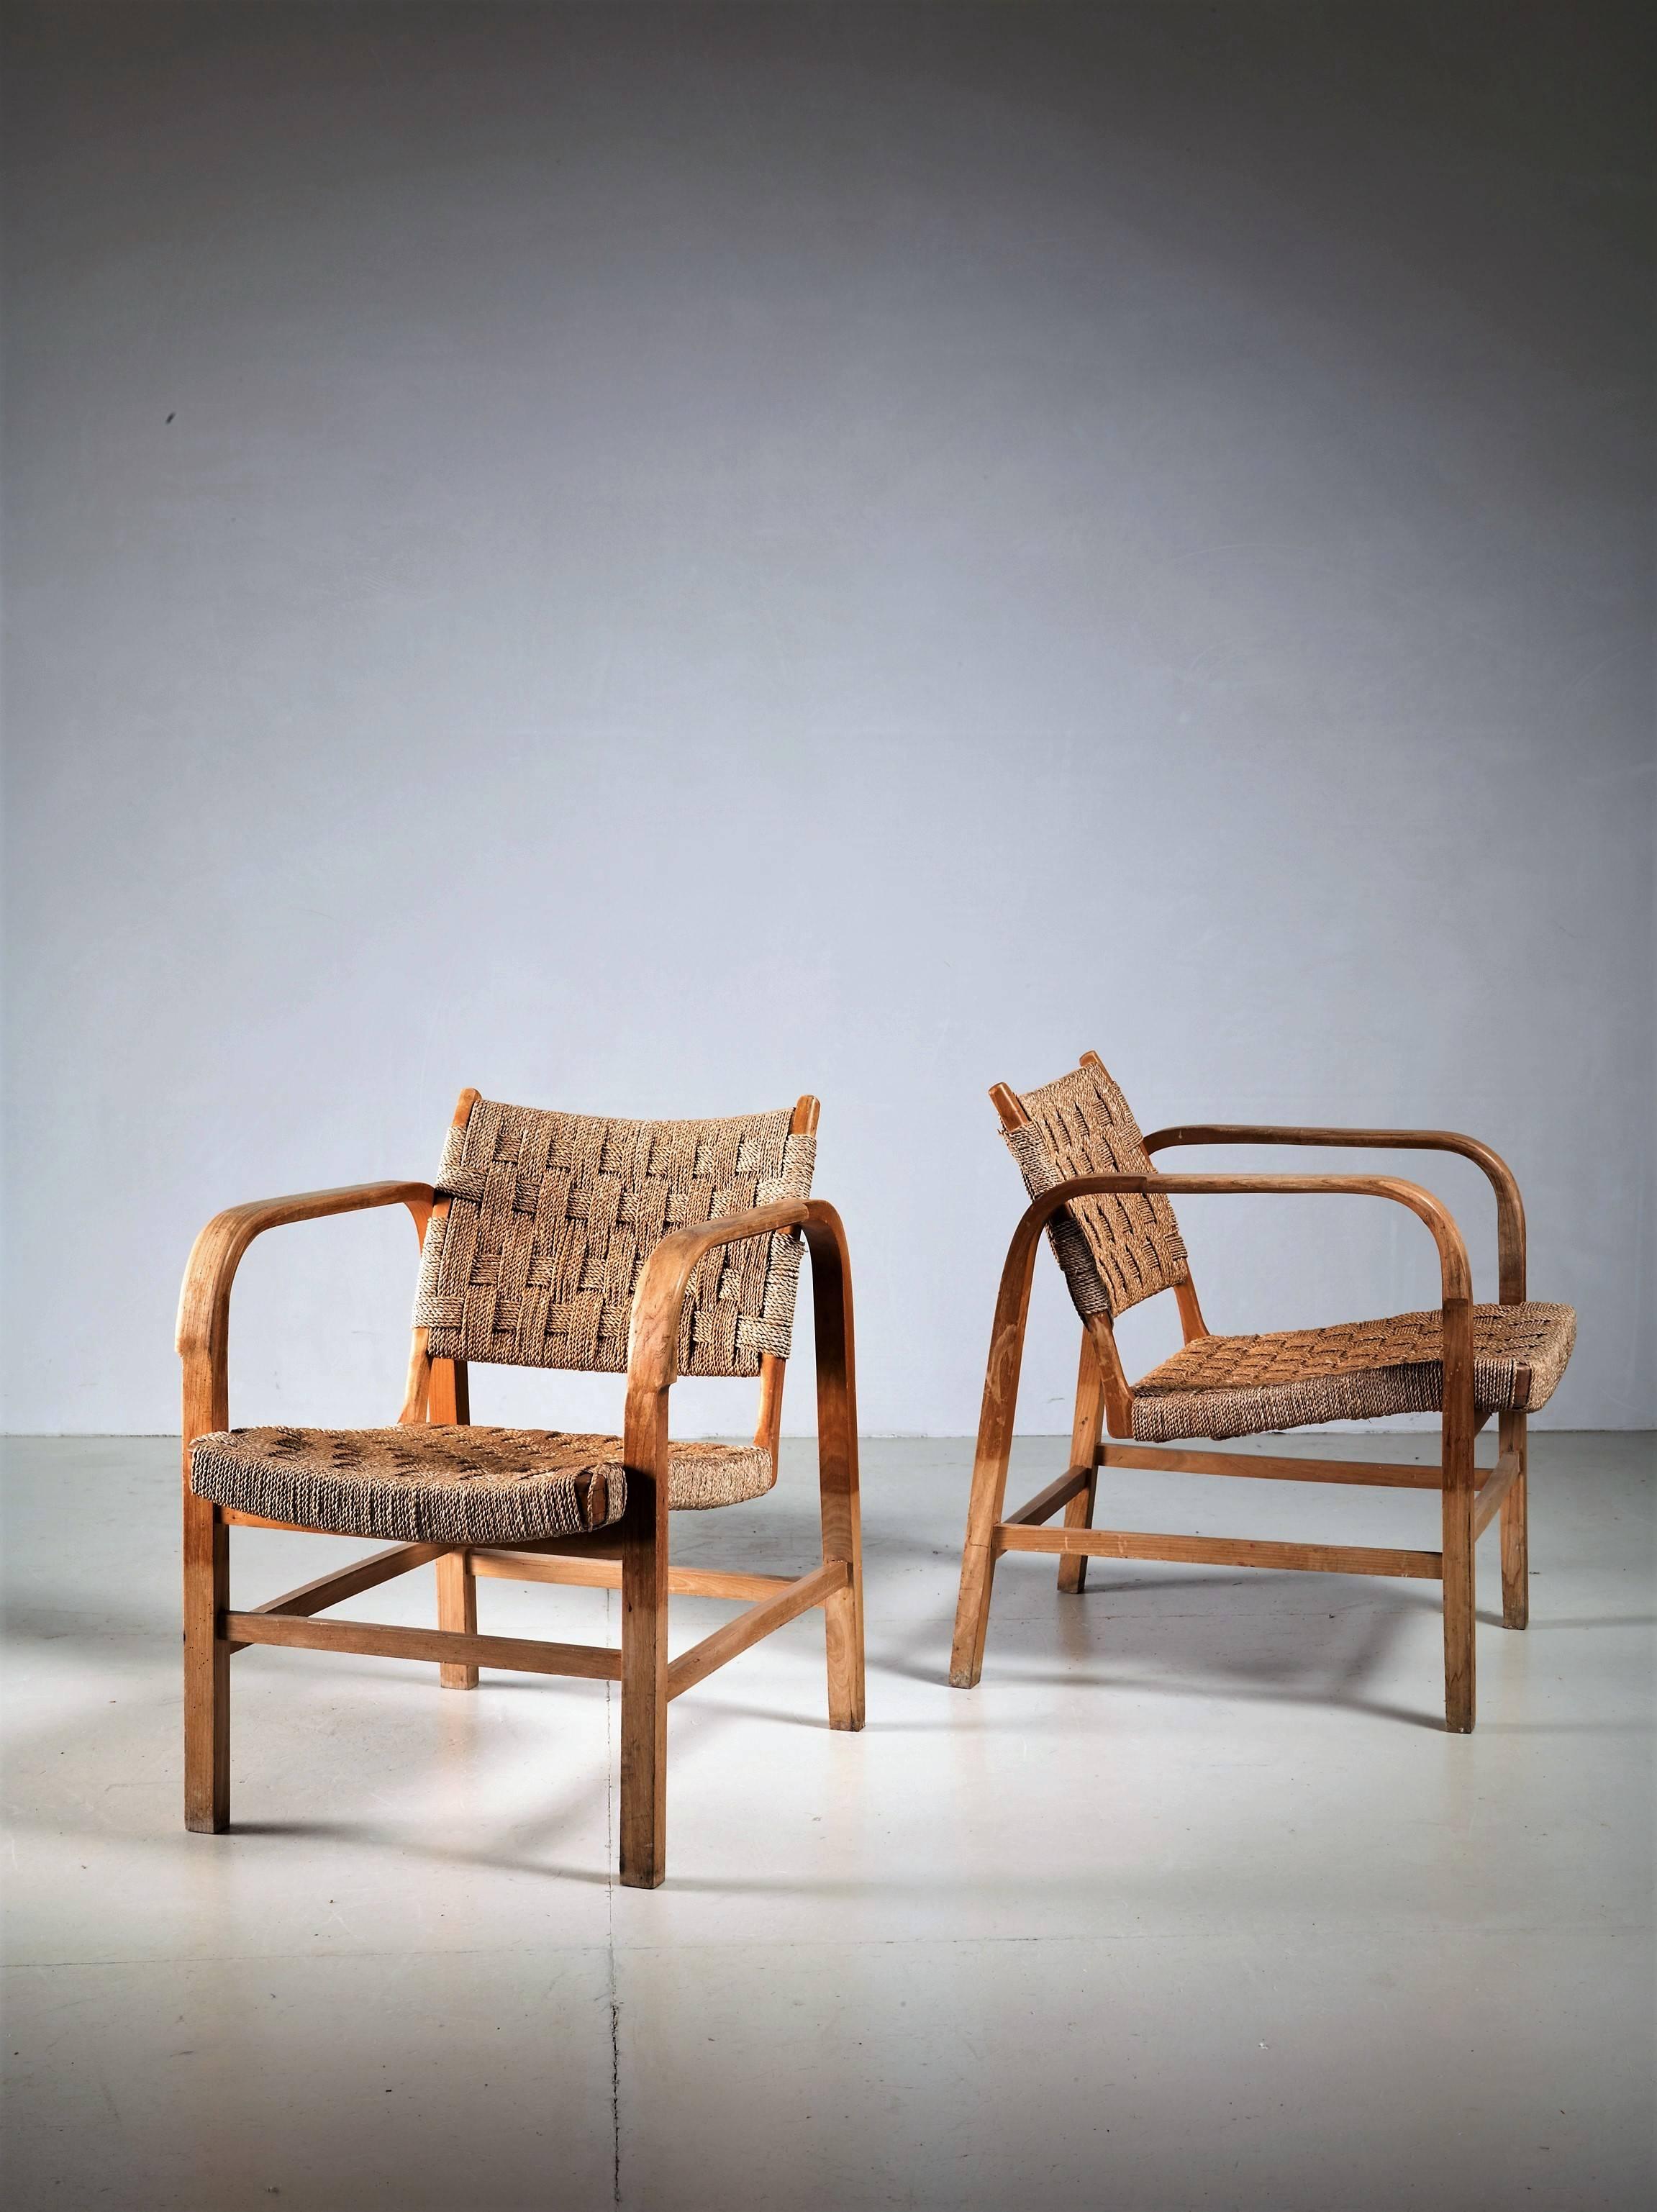 A pair of armchairs attributed to Danish architect and designer Magnus Stephensen for Fritz Hansen. They are made of a bent beech frame with a woven seagrass seating and backrest. Beautiful details are the wider, thinner parts of the armrests and